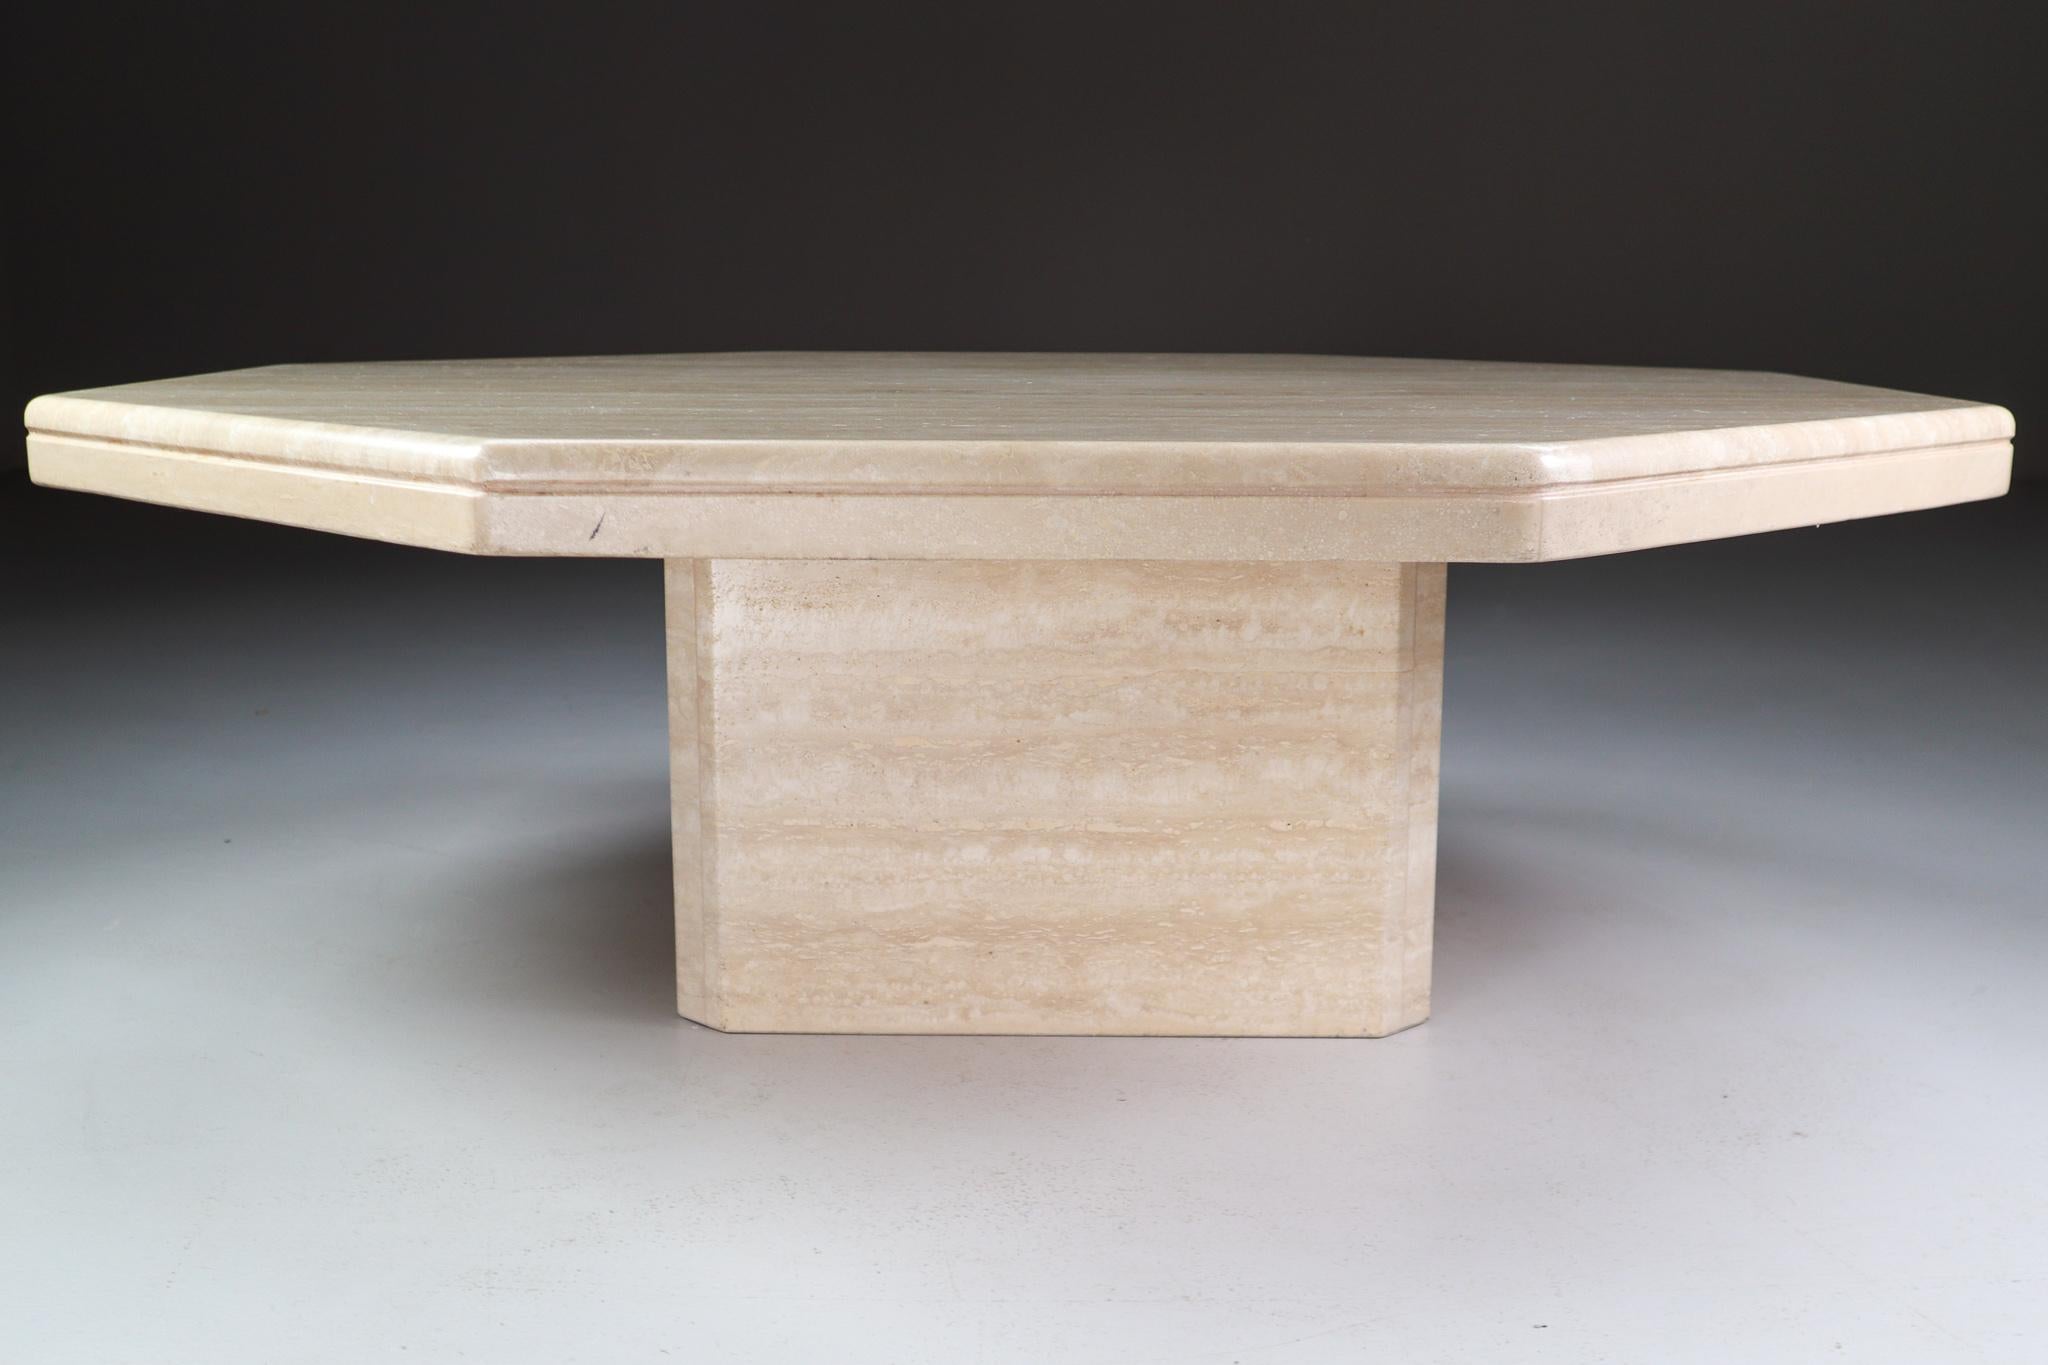 A slab octagonal of thick travertine rests on a wide base in this stylish and simple coffee table. The tabletop is carved with striped rounded edge profile. Stone is a material rich in itself. Echoing classical sculpture, a design that's sleek and